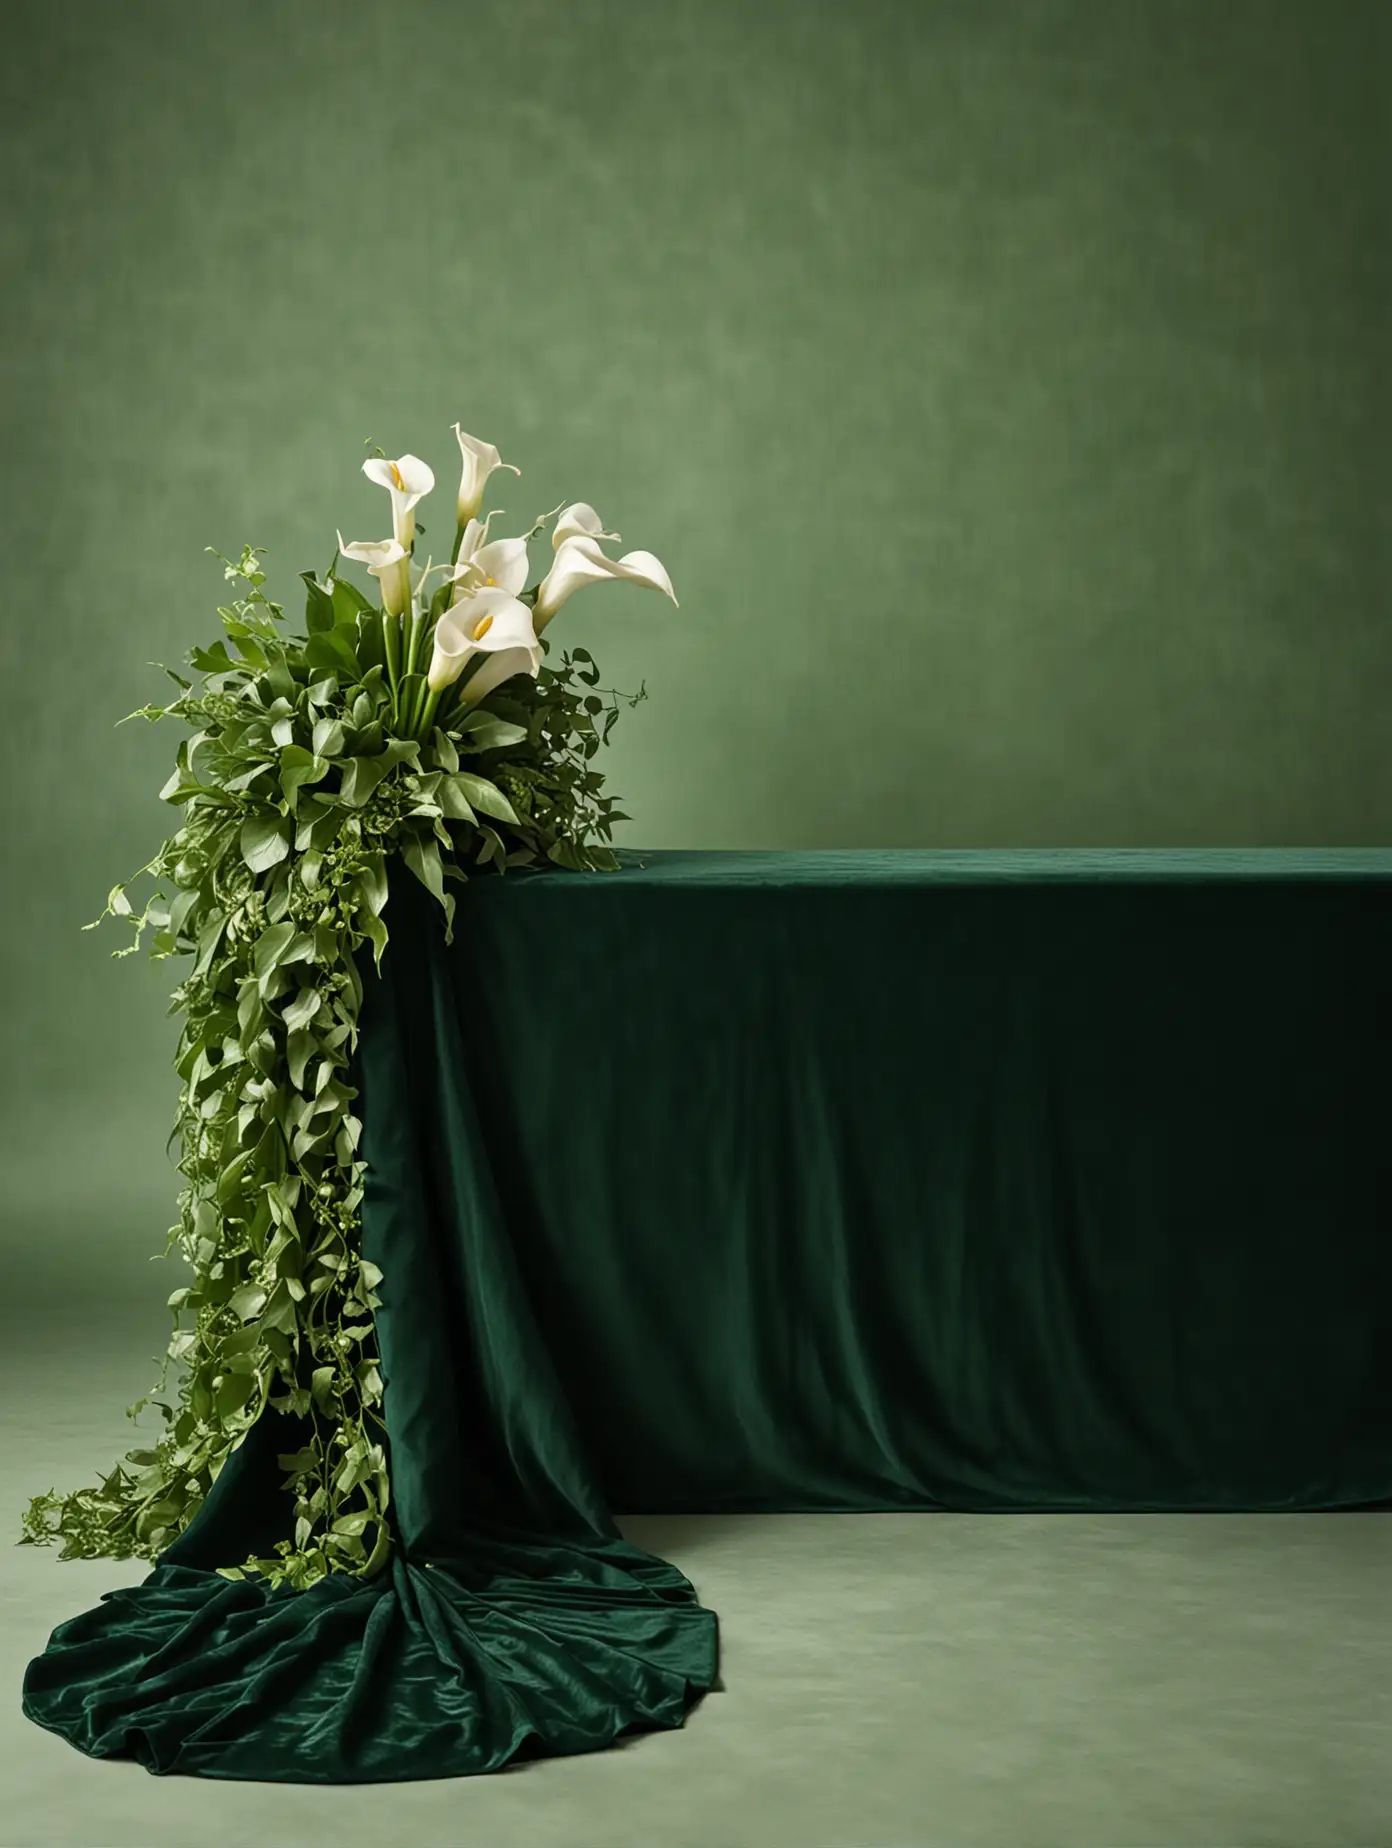 Elegant Funeral Decoration with Draped Green Fabric and Callas on Ivy